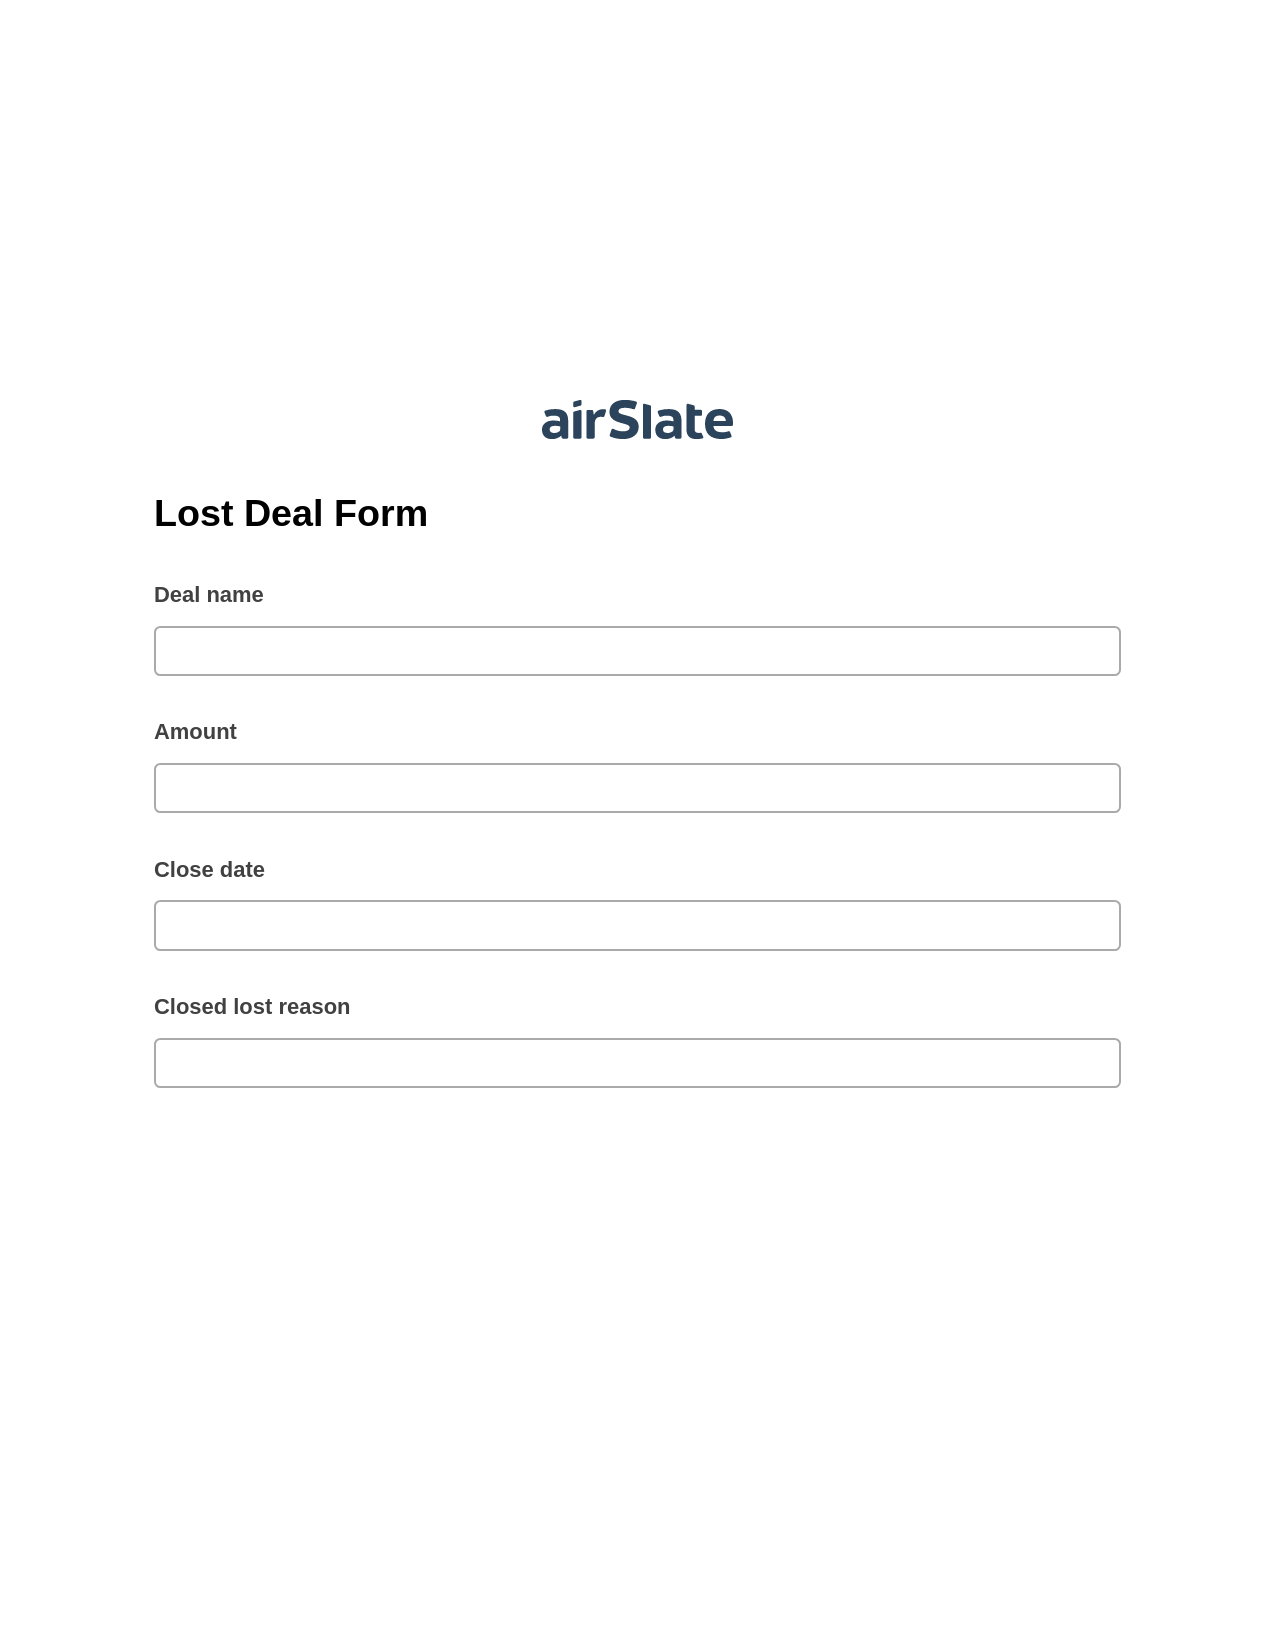 Lost Deal Form Pre-fill from MS Dynamics 365 Records, Custom Field's Value Bot, Export to Salesforce Record Bot